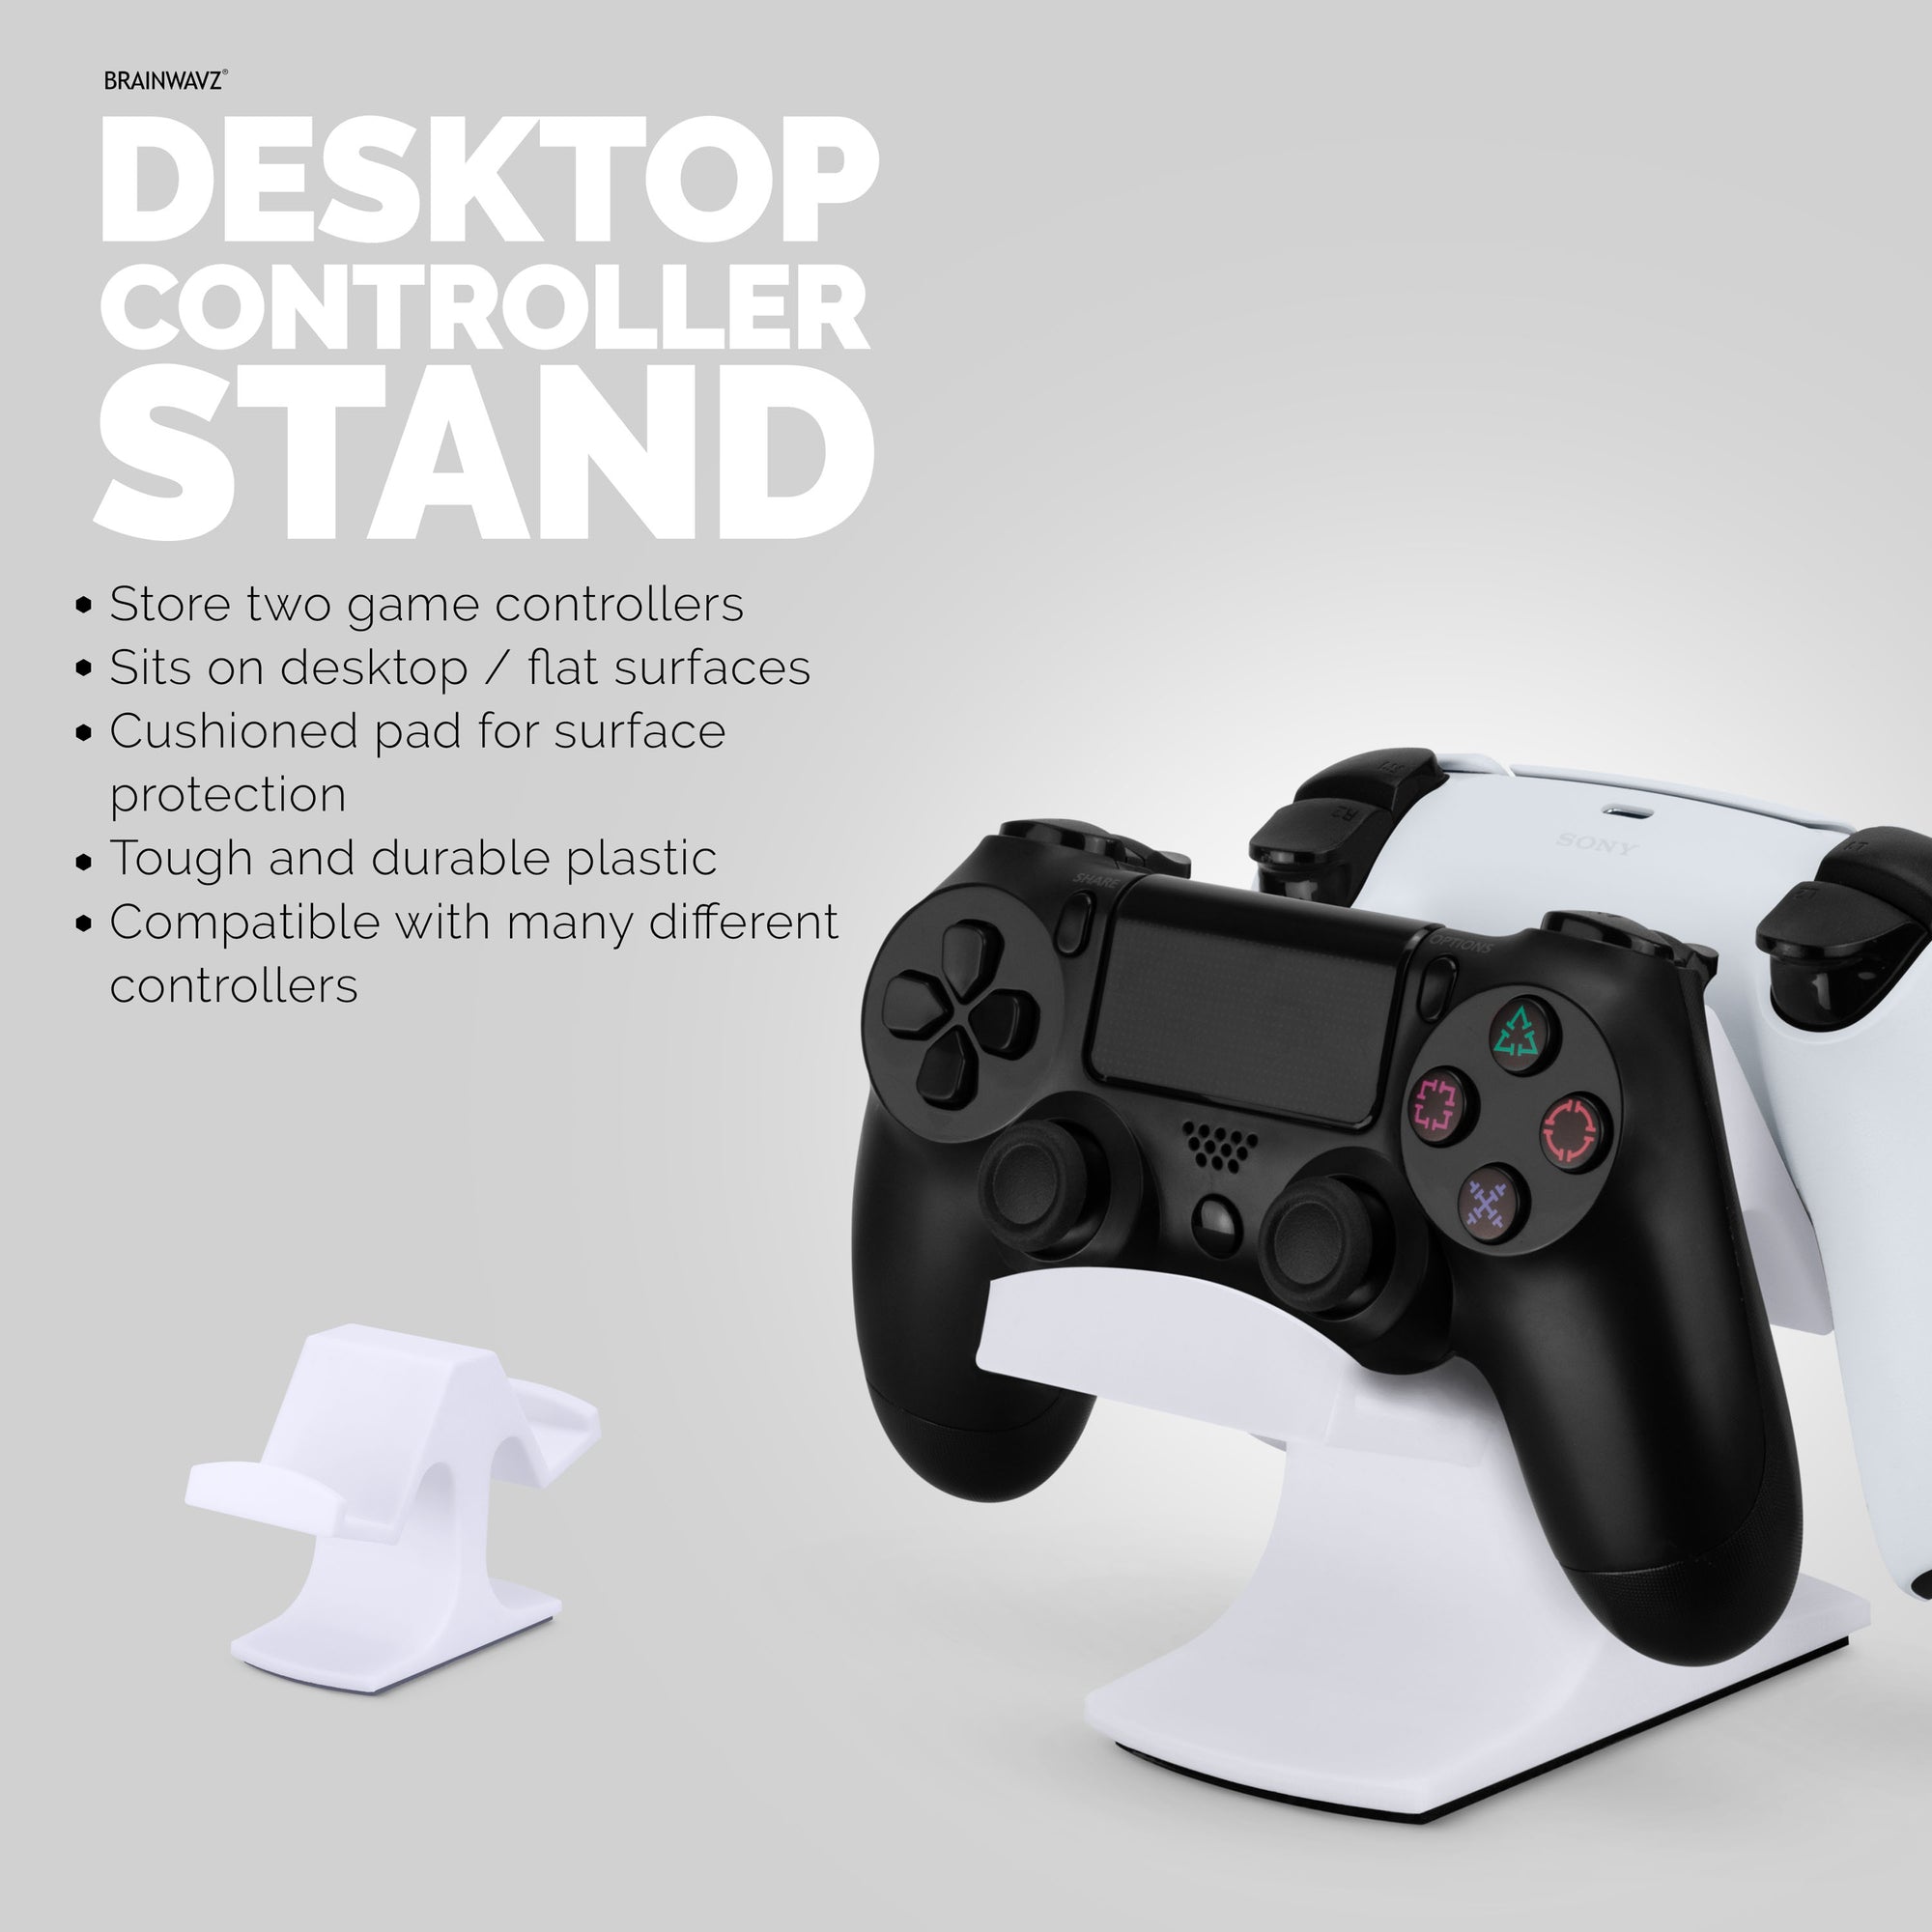 Dual Game Controller Desktop Holder Stand - Universal Design for Xbox ONE,  PS5, PS4, PC, Steelseries, Steam & More, Reduce Clutter UGDS-03 - Brainwavz  Audio